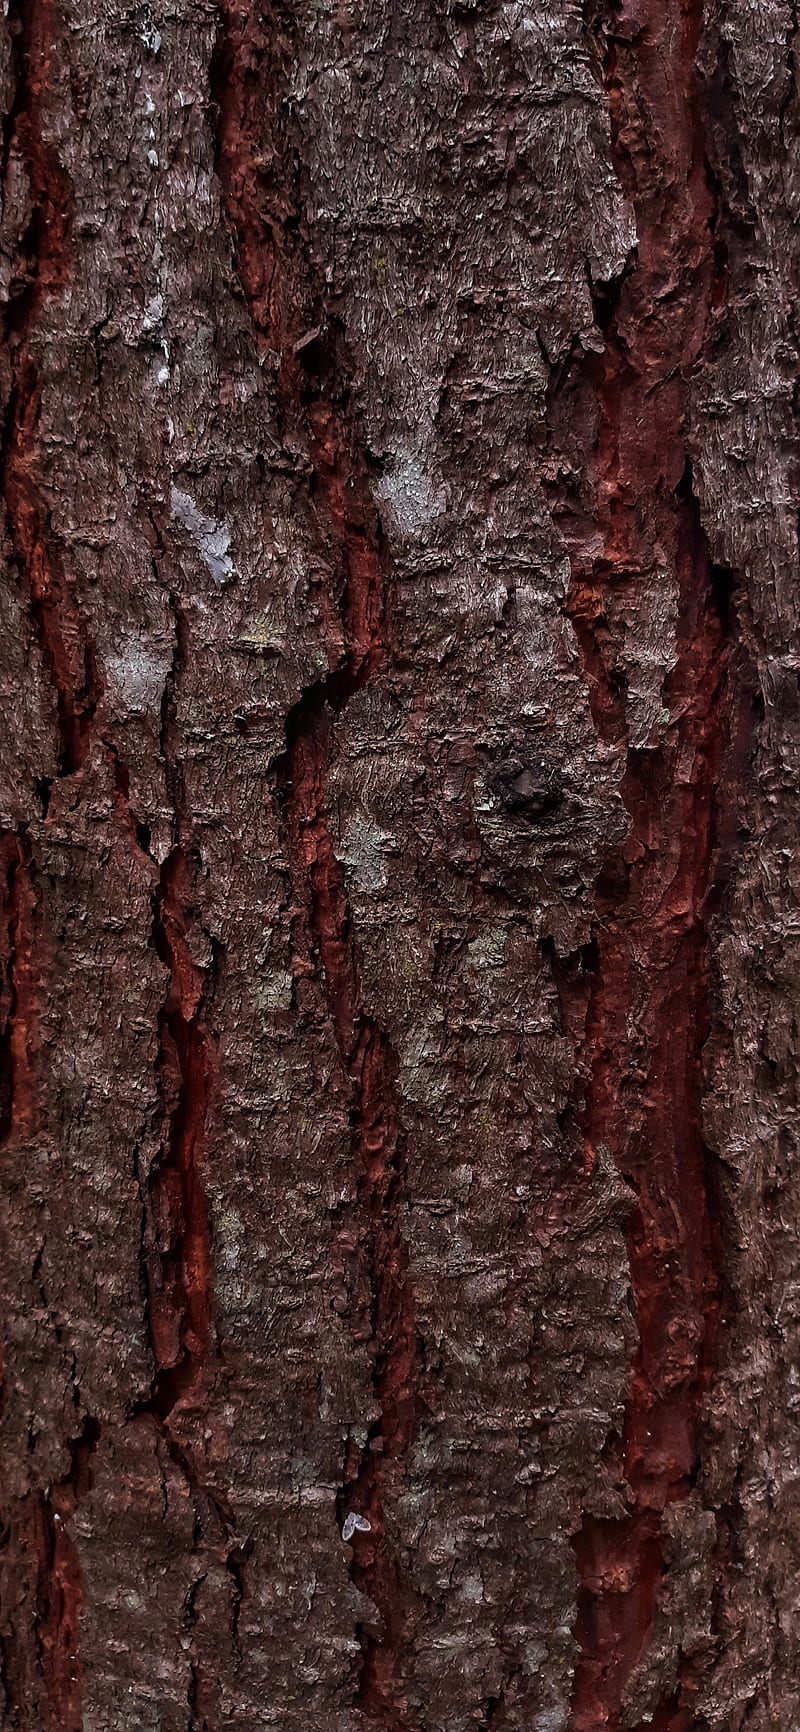 Pino, cafe, forest, madera, nahuelpi, nature, nature, tronco, trunk, wood, HD phone wallpaper